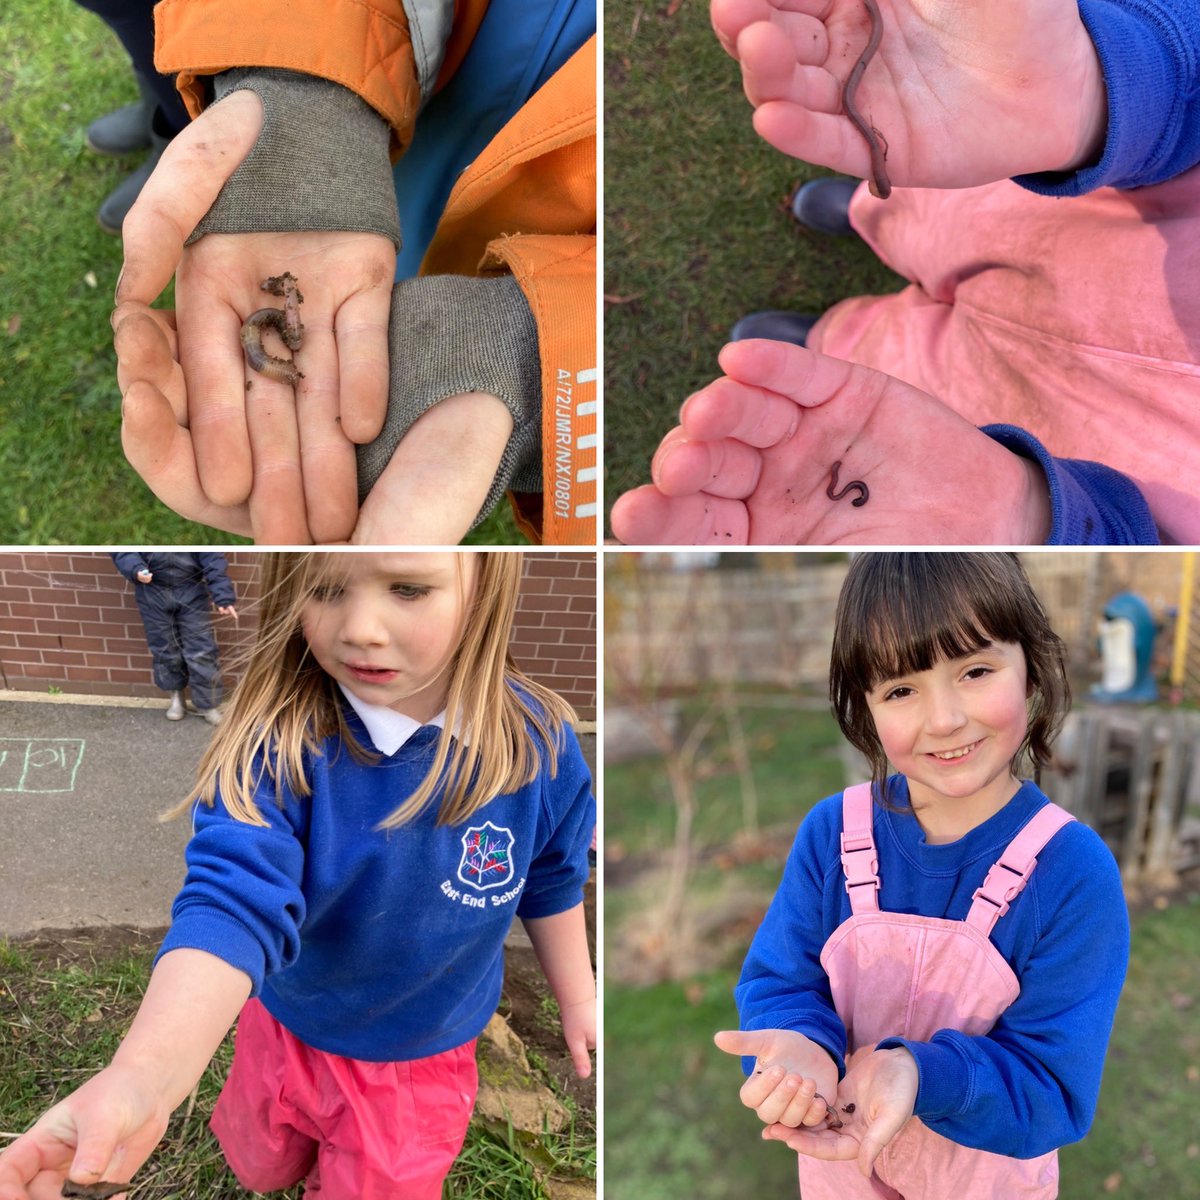 And it would be an outdoor session without some trails, treasure leaves & wiggly worms! #lovingnature #naturestreasures #nofear #inquisitiveminds @canigoandplay @UpstartScot @wildthingsUK